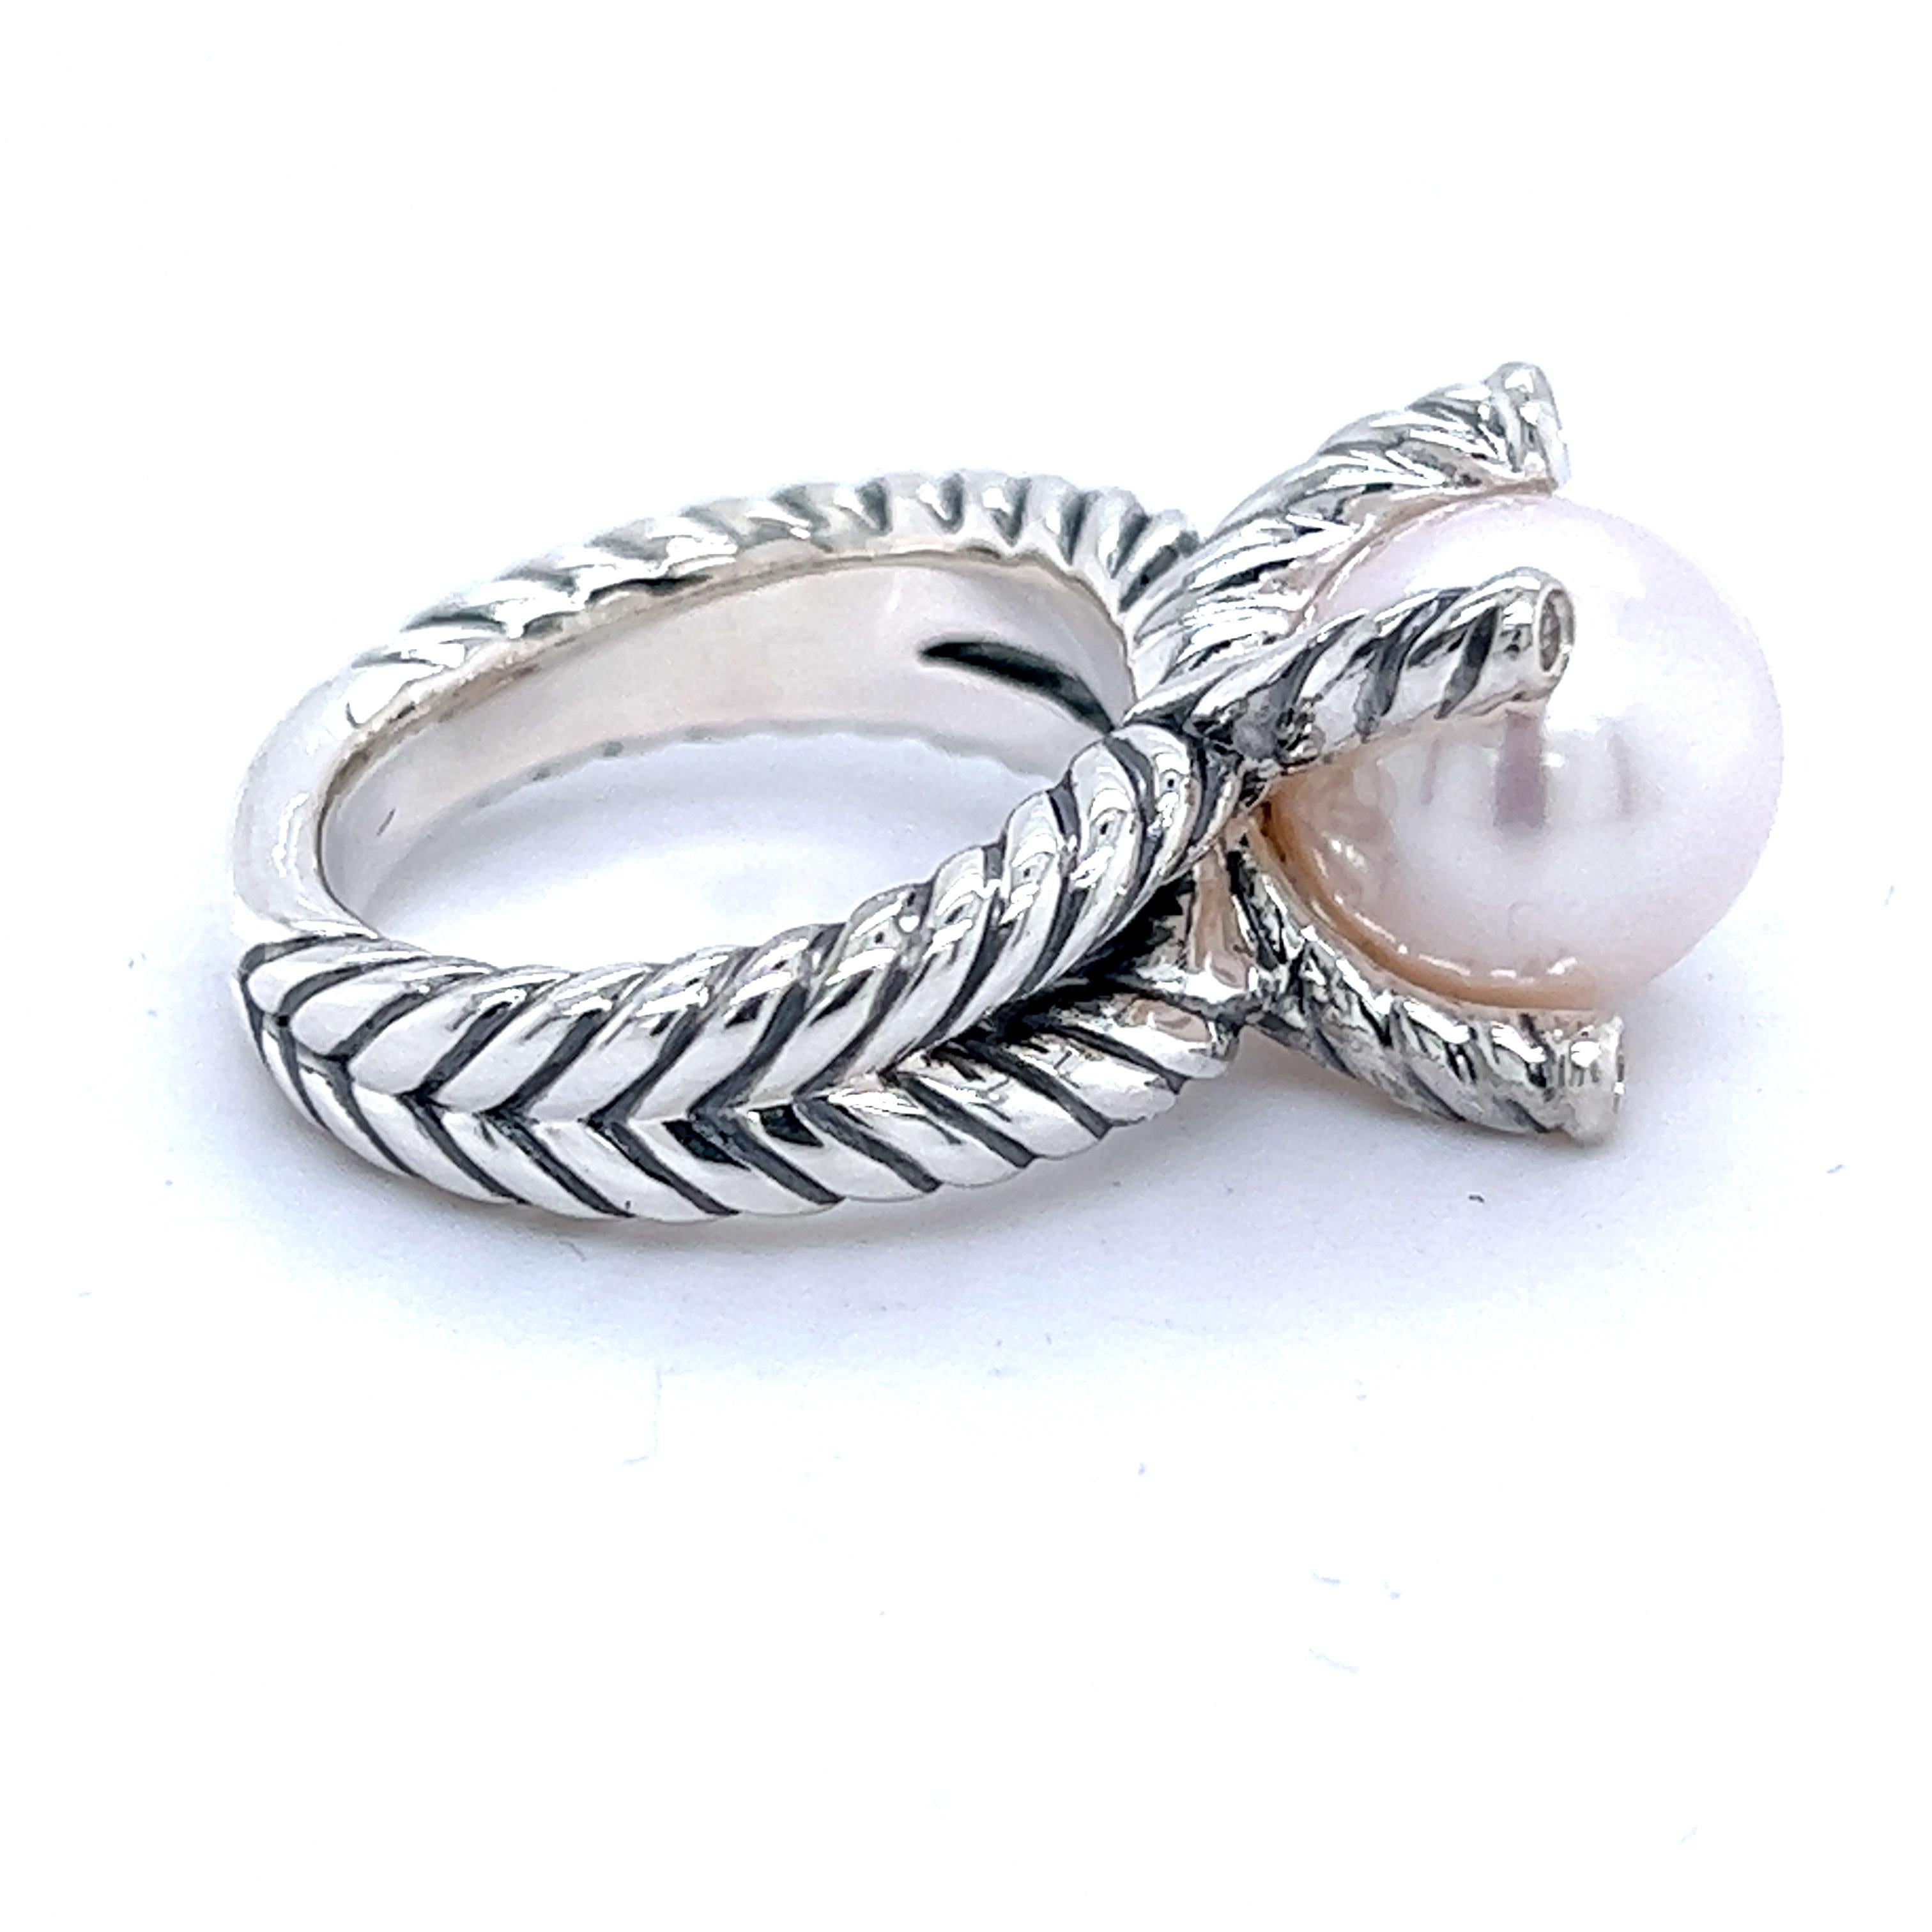 Women's David Yurman Estate Pearl Diamond Cable Collectables Ring 5 Silver 0.05 CT DY174